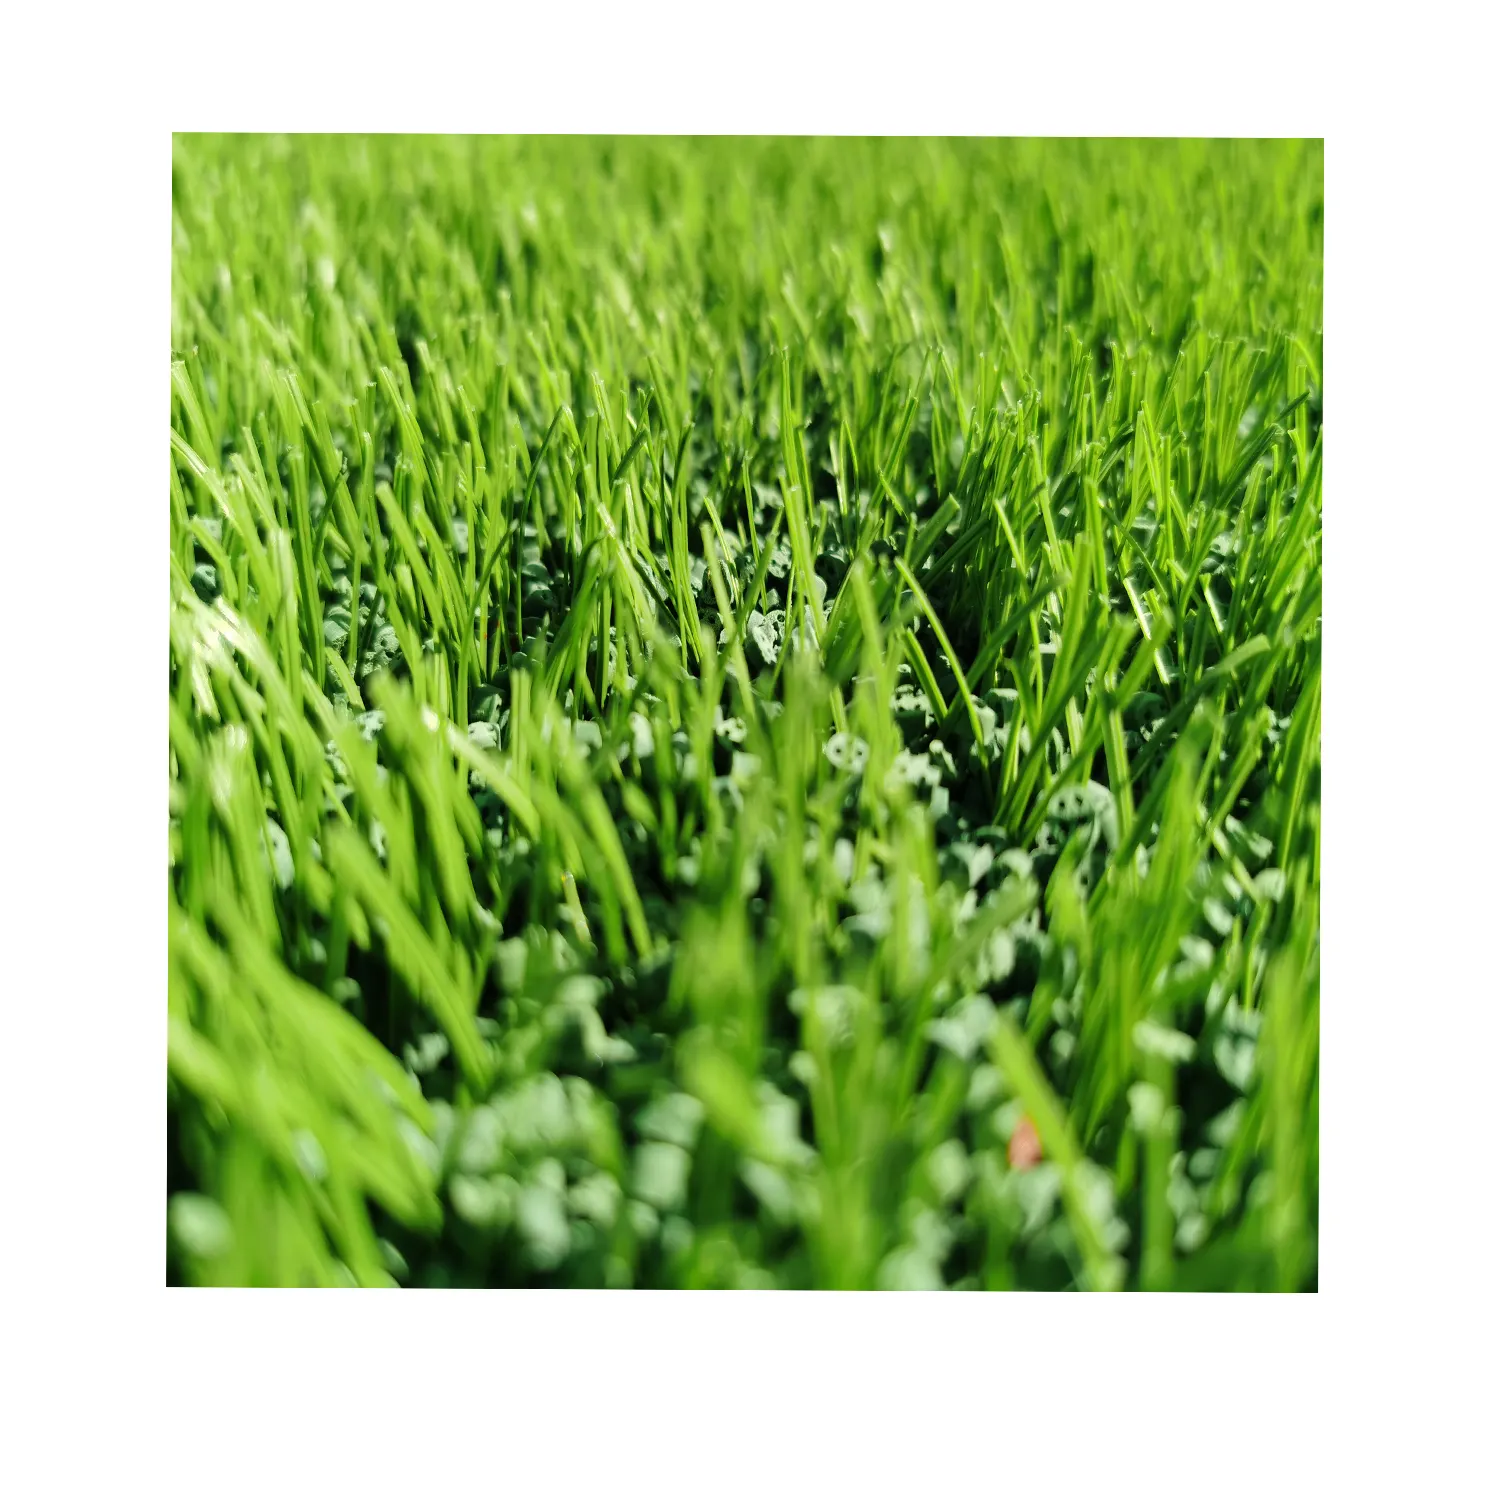 Cheap and High quality green football artifical grass carpet for soccer pitch football pitch football cage Premium Grass